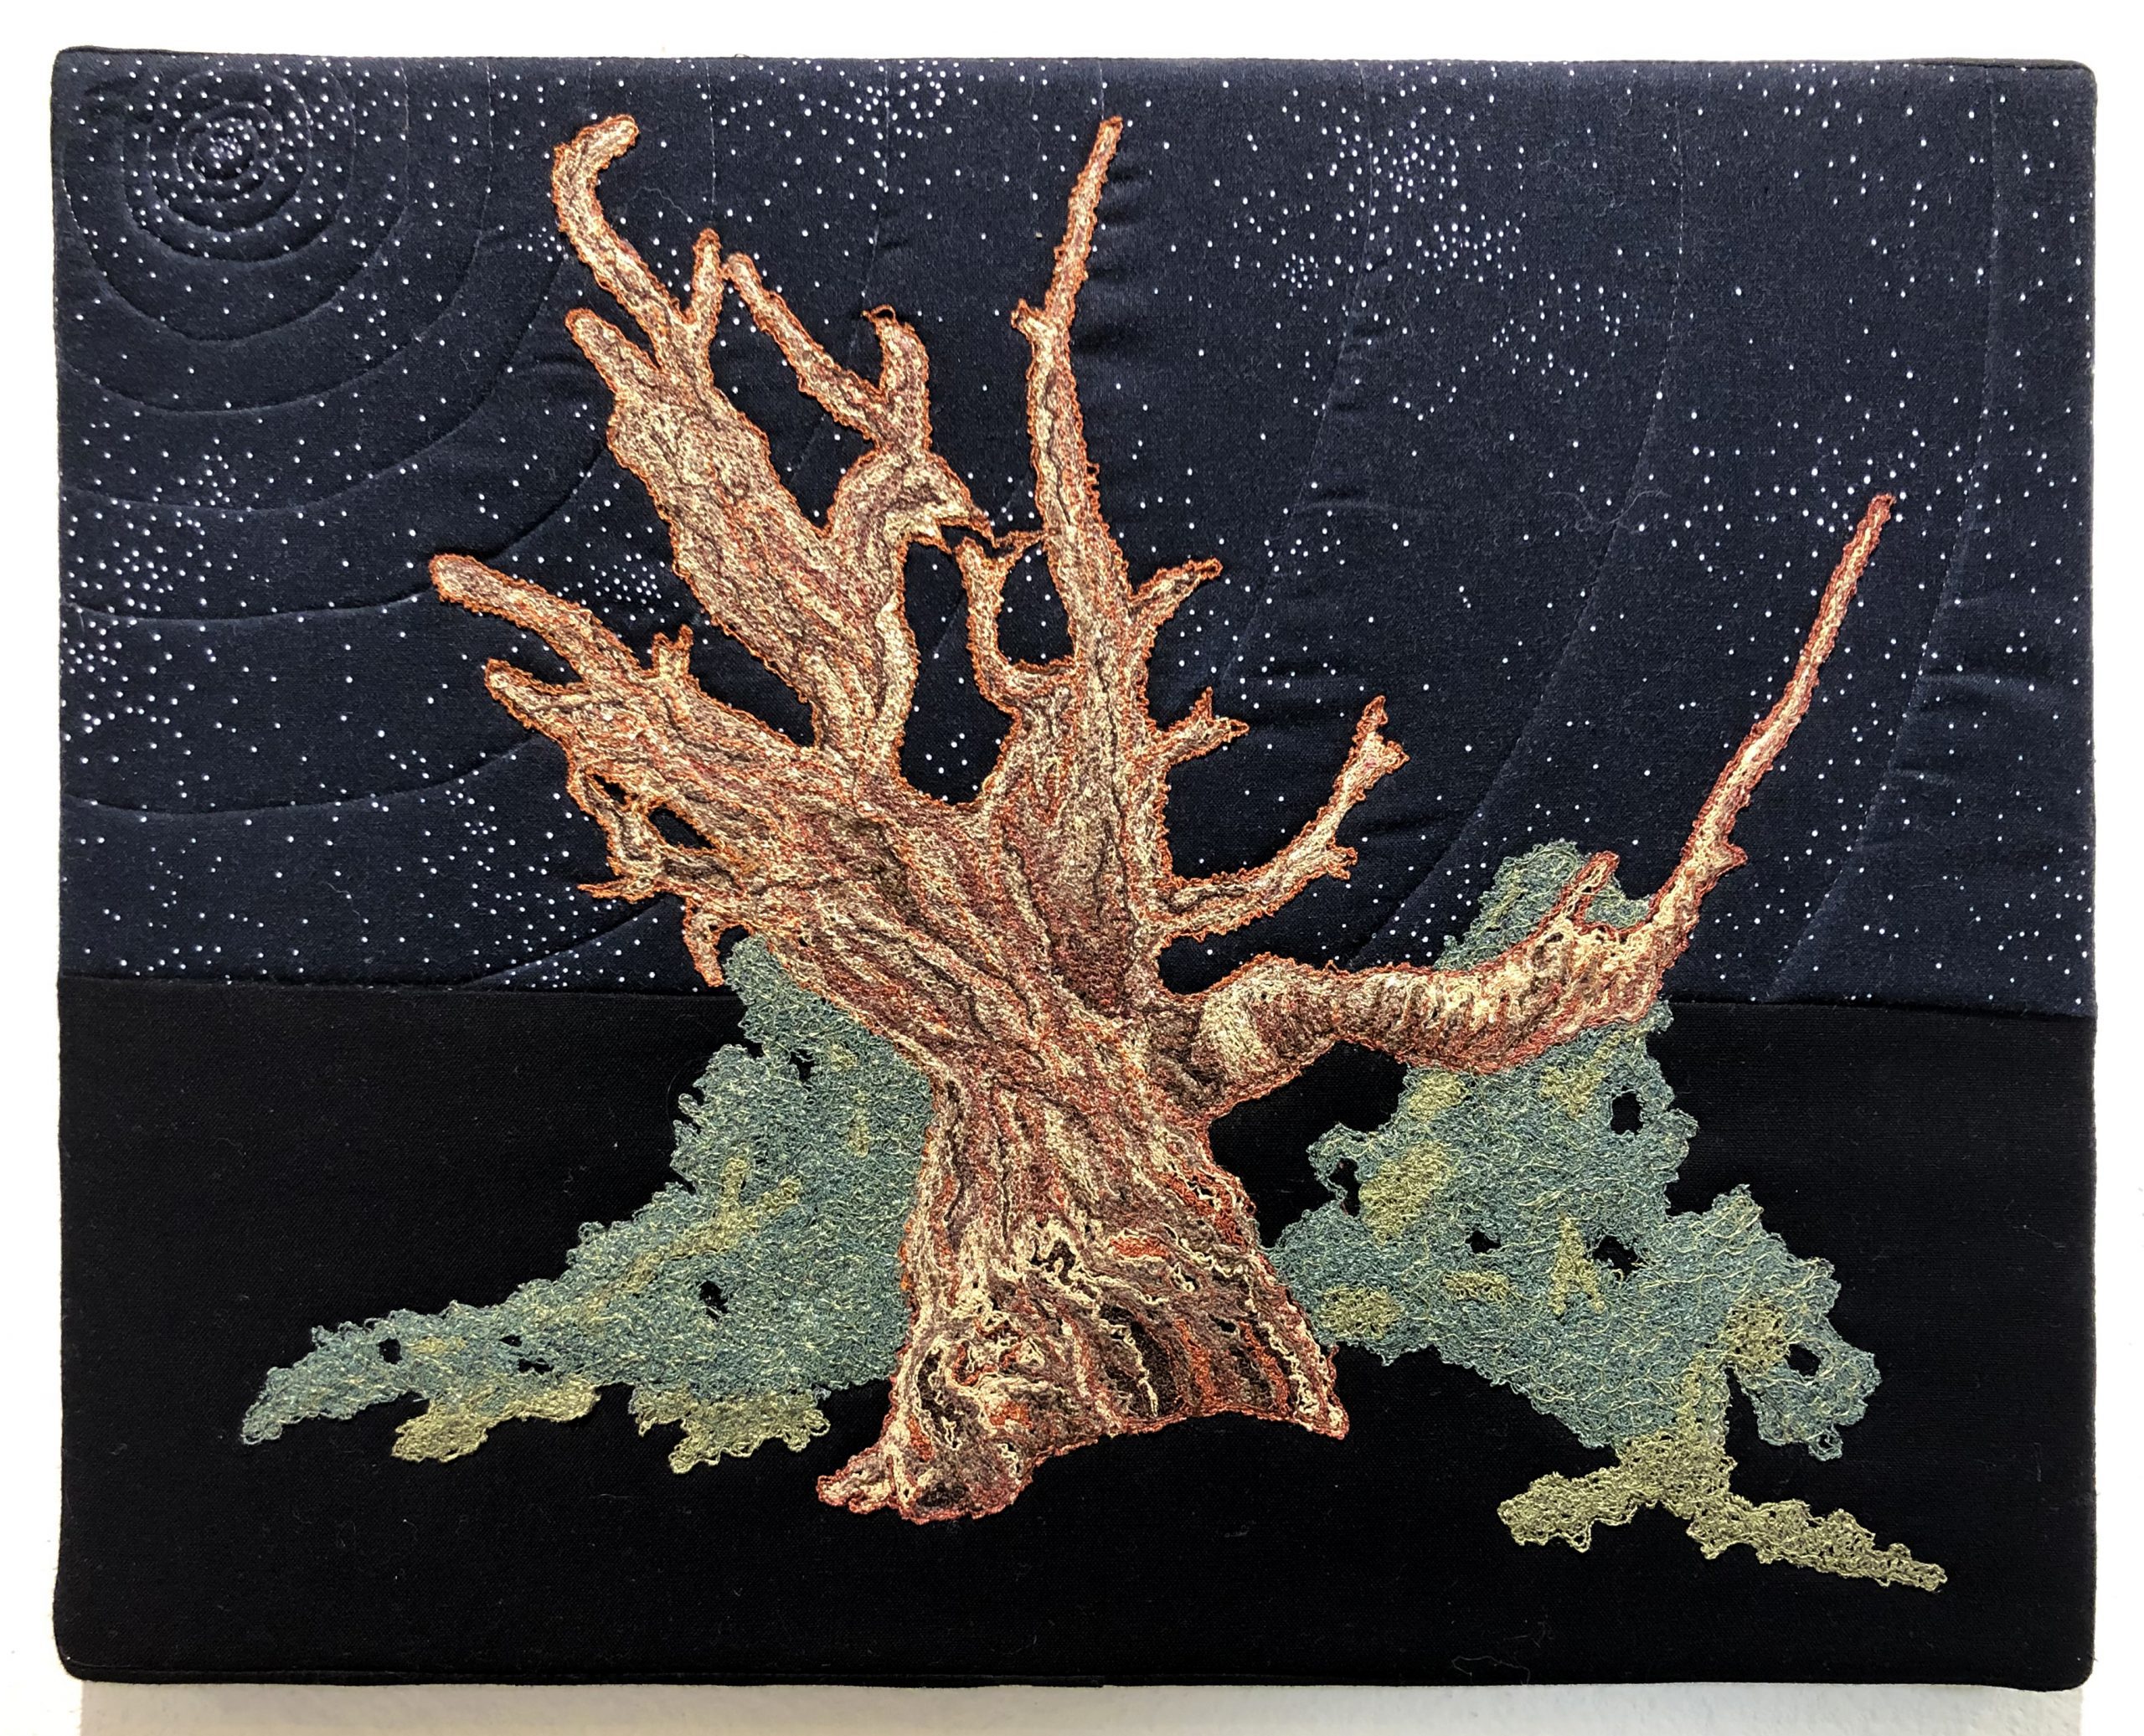 ‘Sewjourners: TREES’ showing at the Wildling Museum through Jan. 16